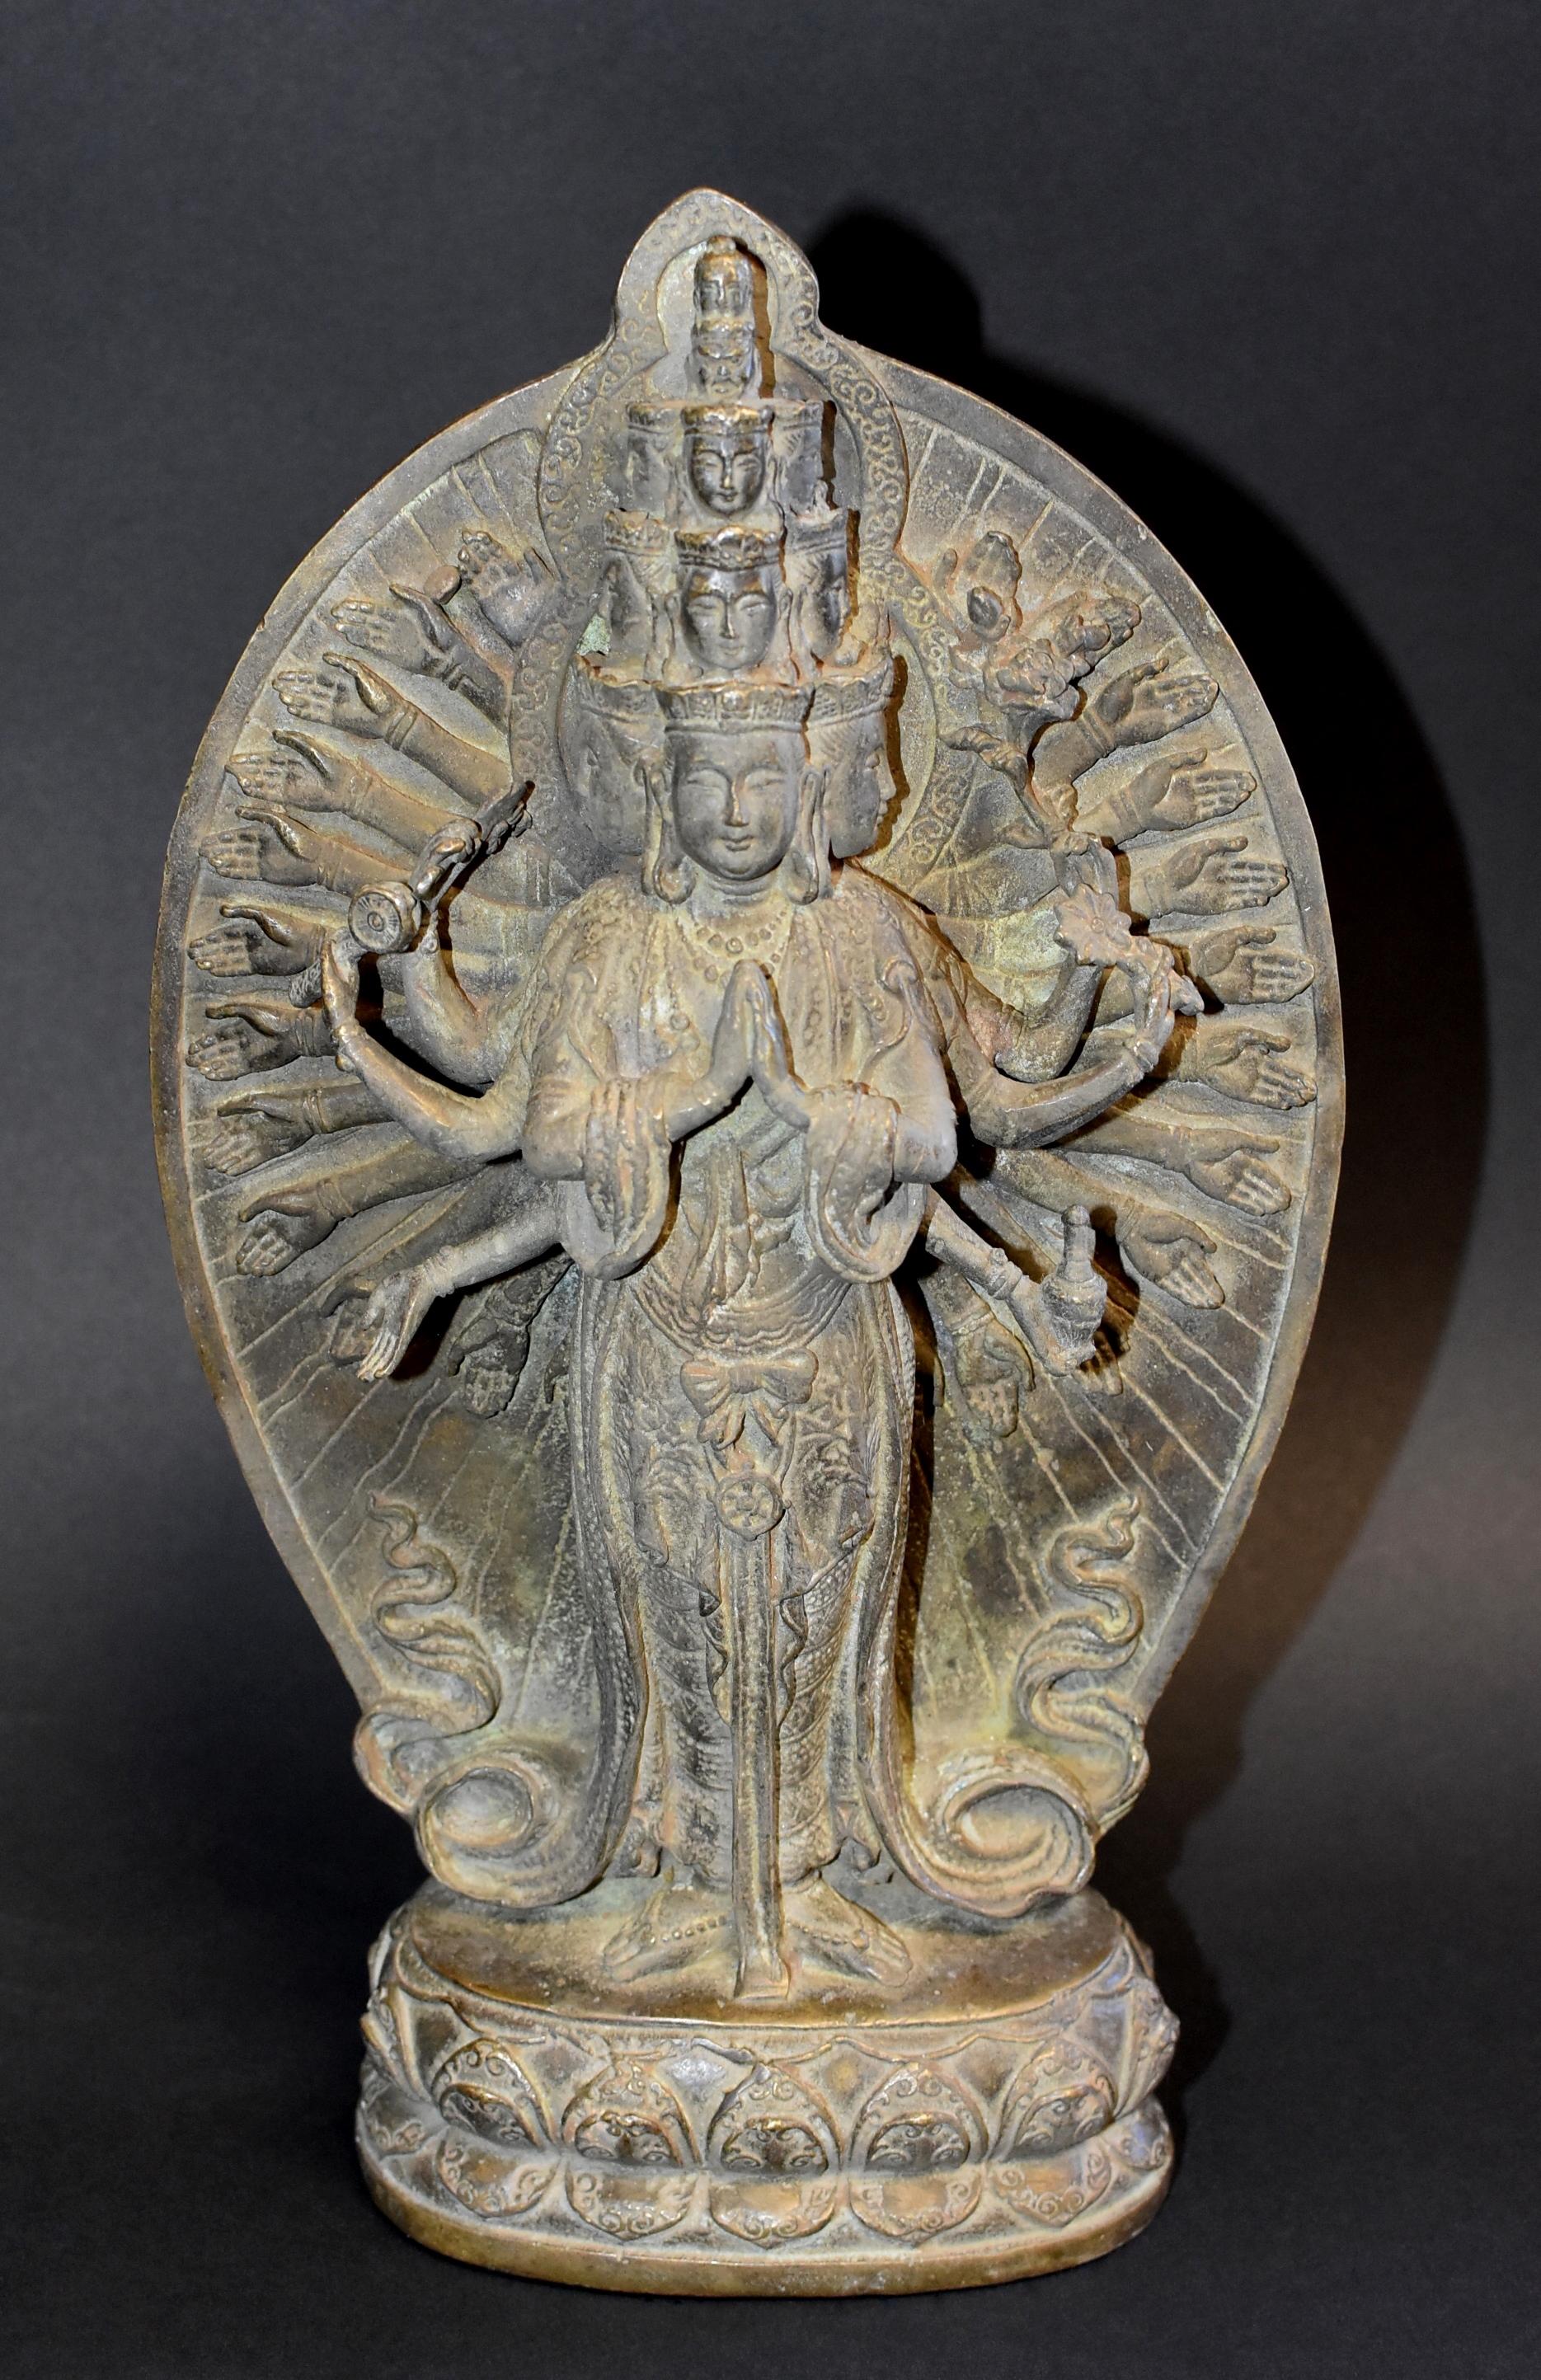 A most exquisite bronze Multiple Headed and Armed Avalokitesvara Guan Yin statue. Standing on double lotus throne with the main pair of hands held in the gesture of respectful salutation, 